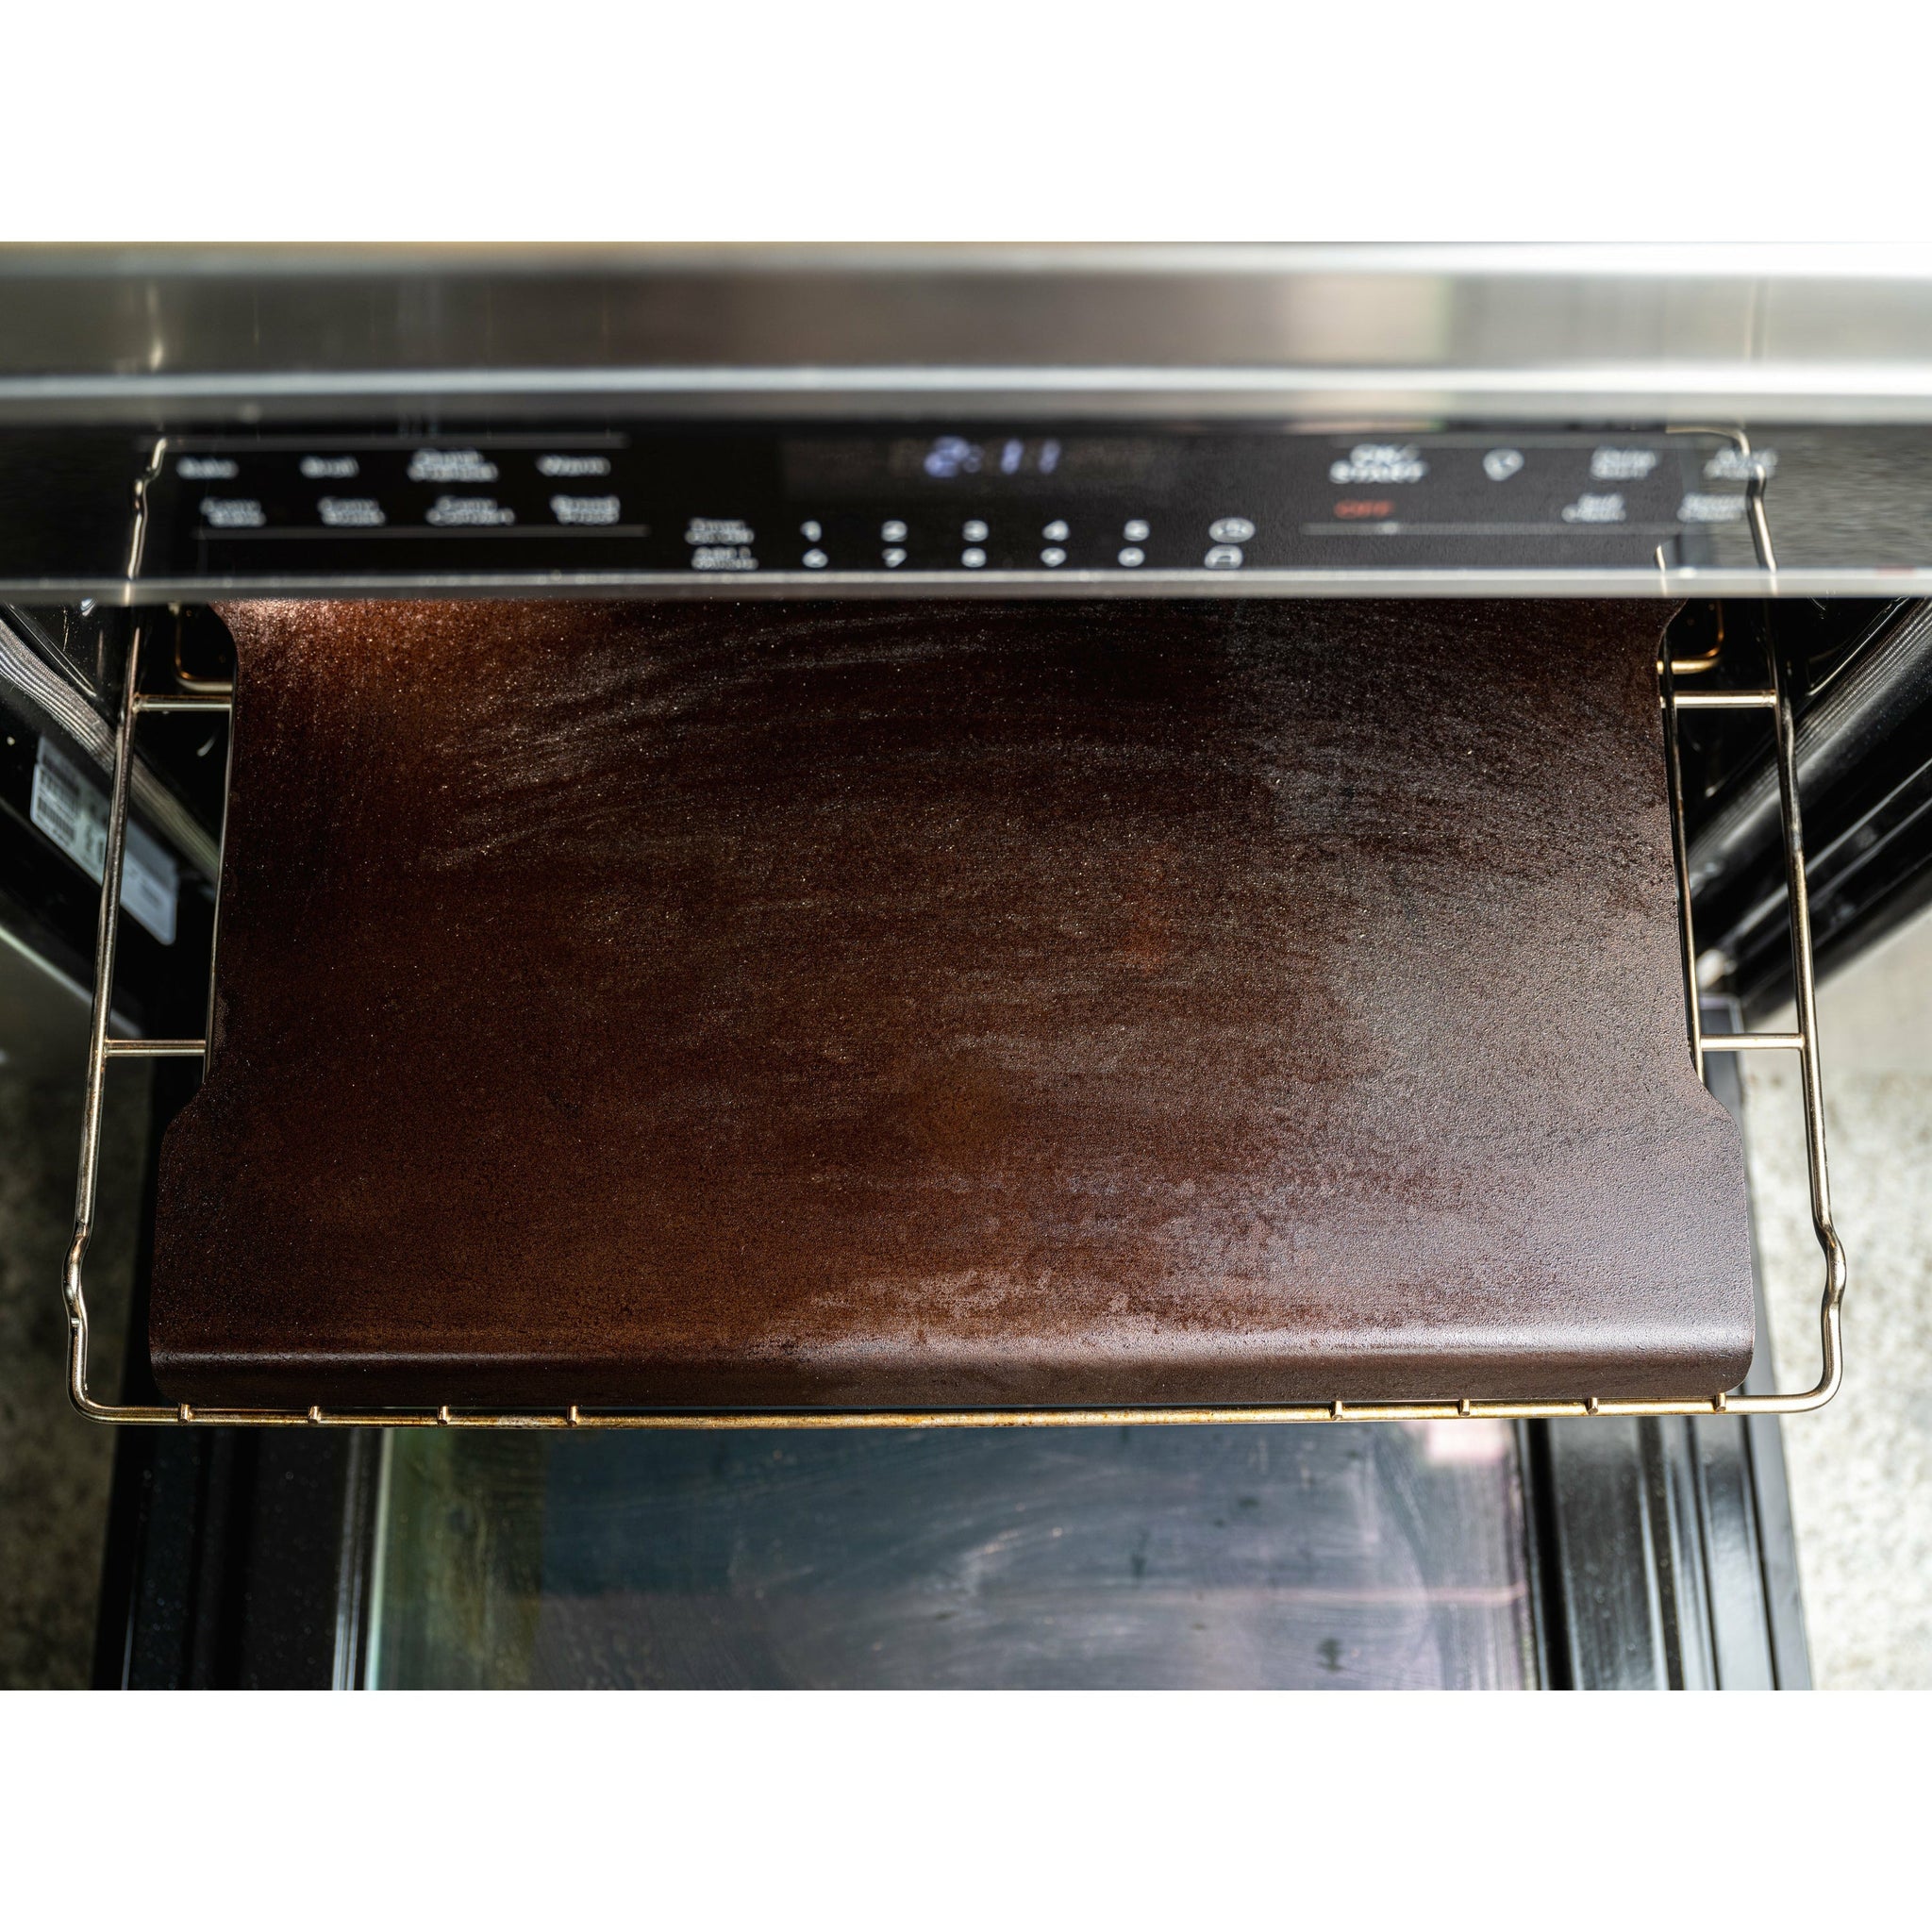 Baking Steel  Pizza Stone Made from Ultra-Conductive Steel – Baking Steel ®